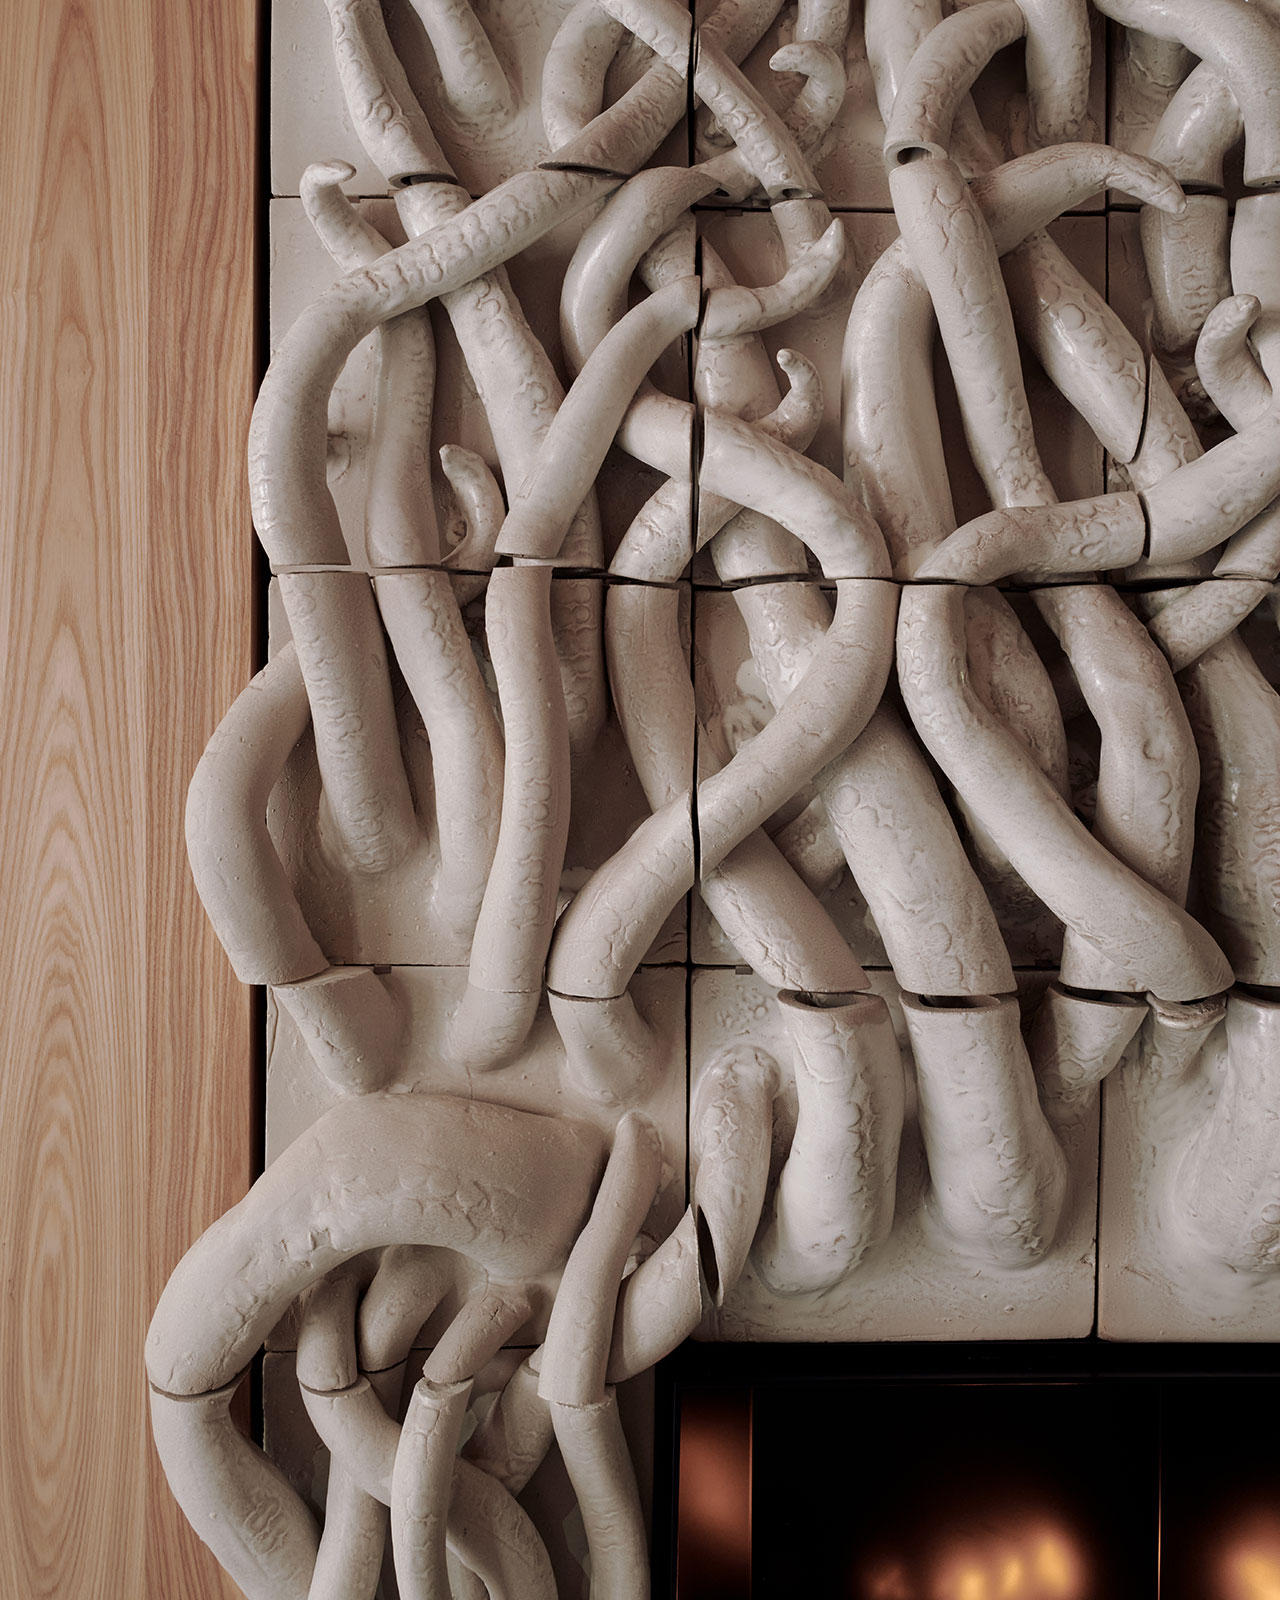 Bespoke bas relief ceramic installation by Souraya Haddad.
Photography by Michael Sinclair.